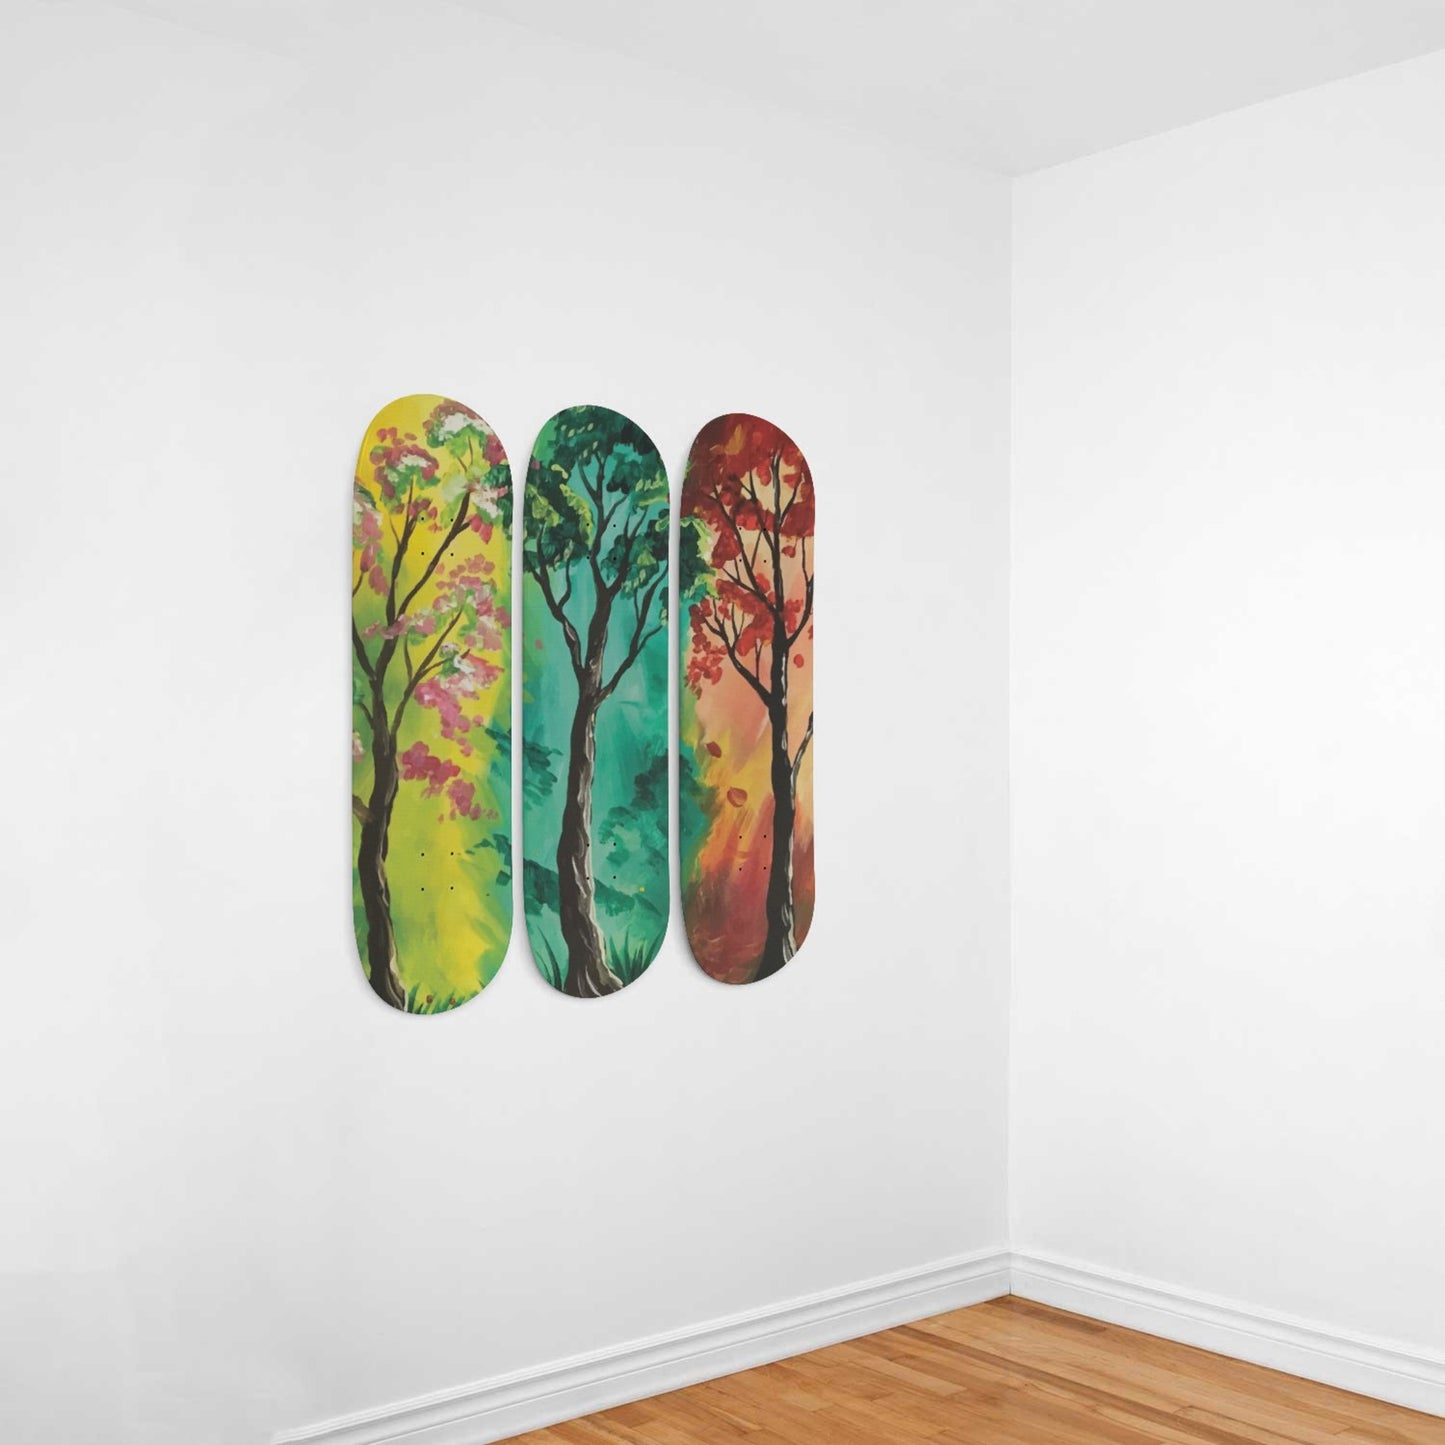 Random Colorful Artwork 10 | Skateboard Deck Wall Art, Wall Hanged Room Decoration, Maple Wood, Accent Gift for Home, Aesthetic Wall Art